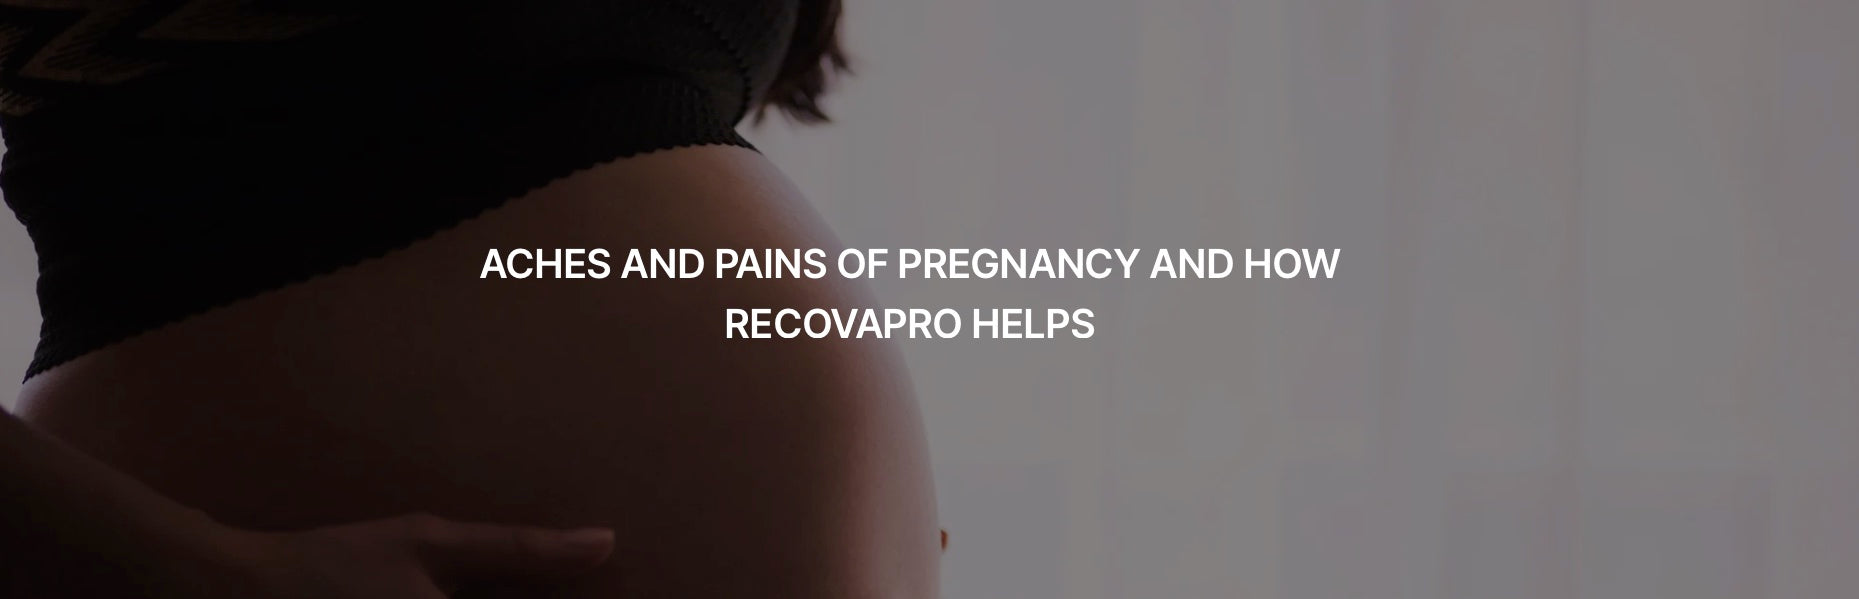 ACHES AND PAINS OF PREGNANCY AND HOW RECOVAPRO HELPS